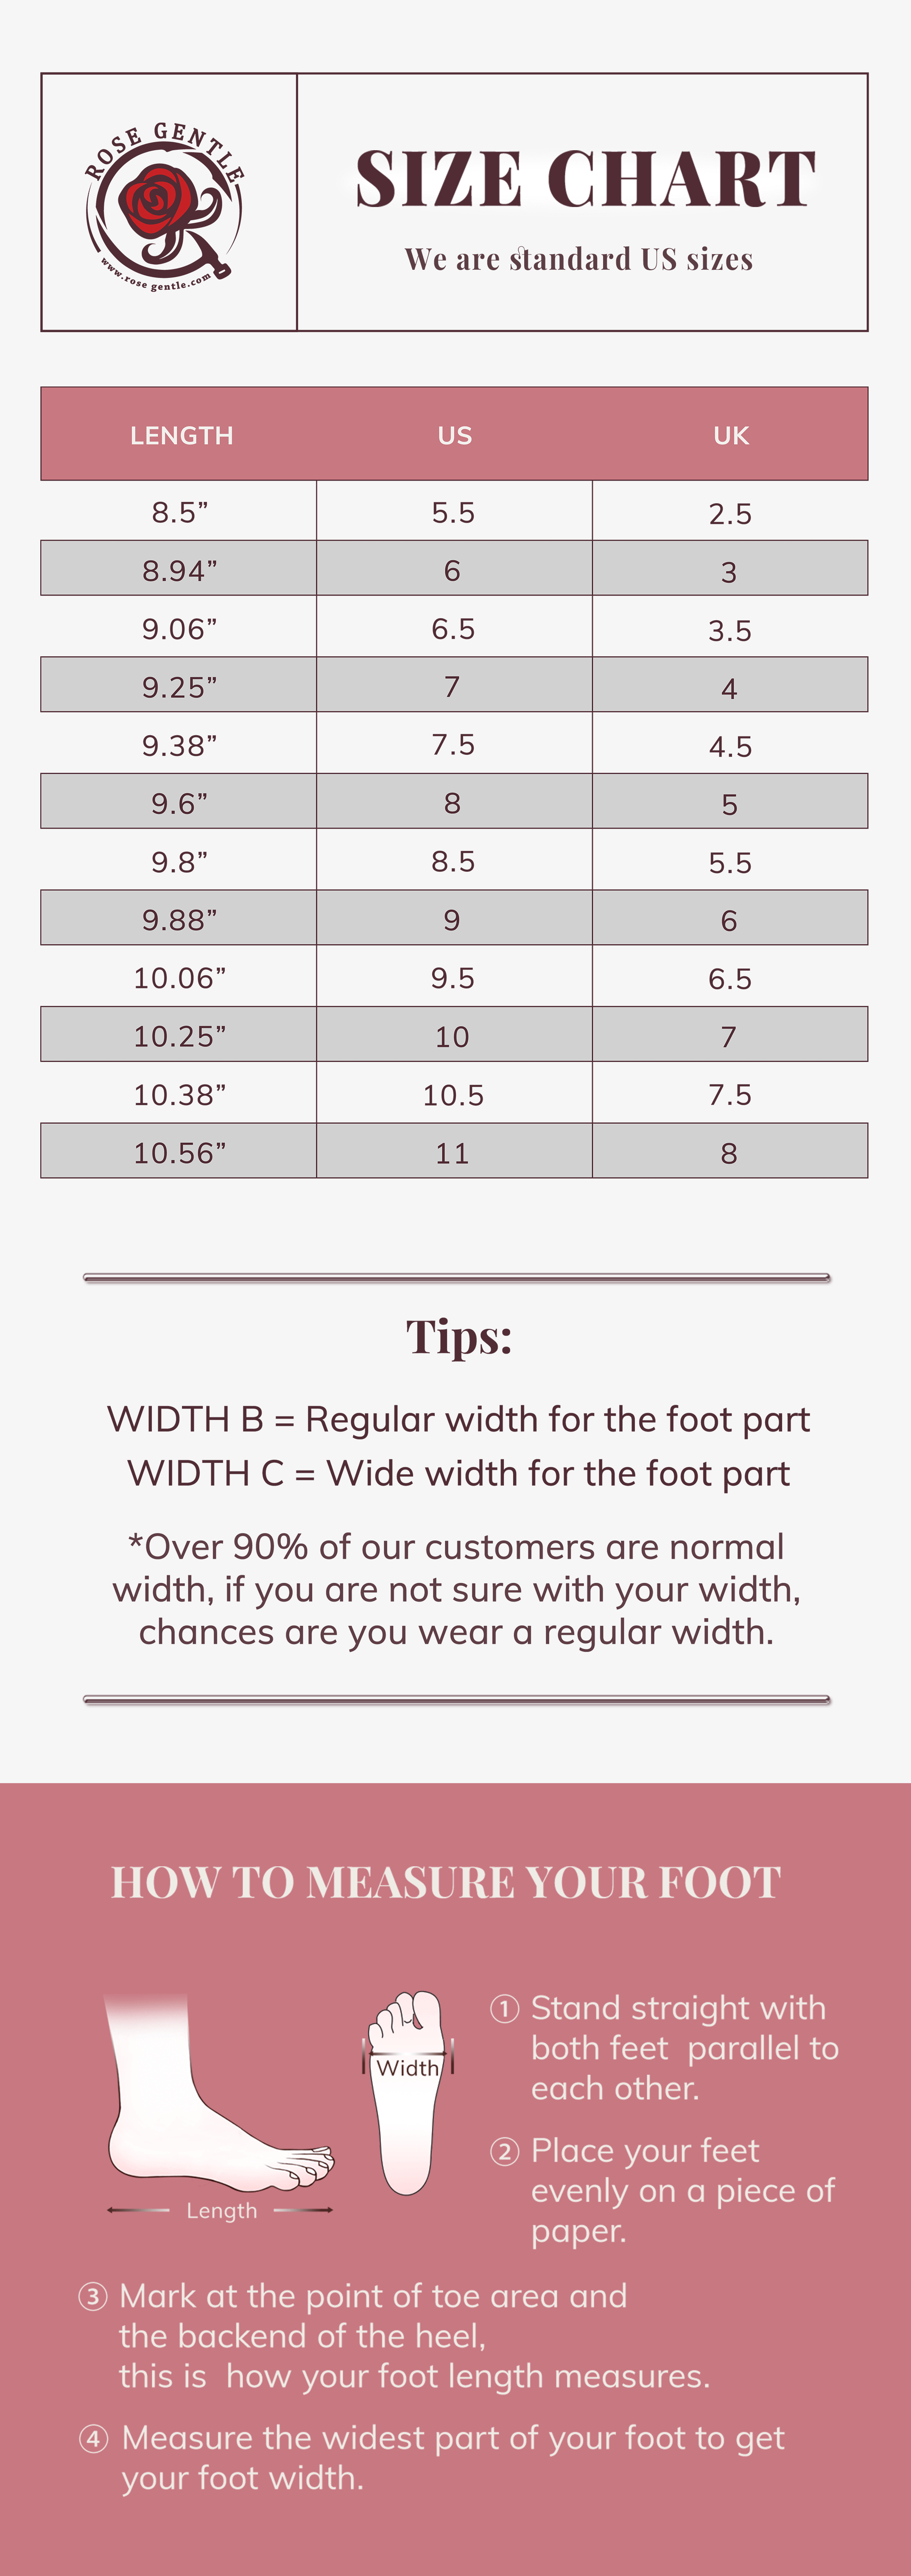 rose gentle size chart